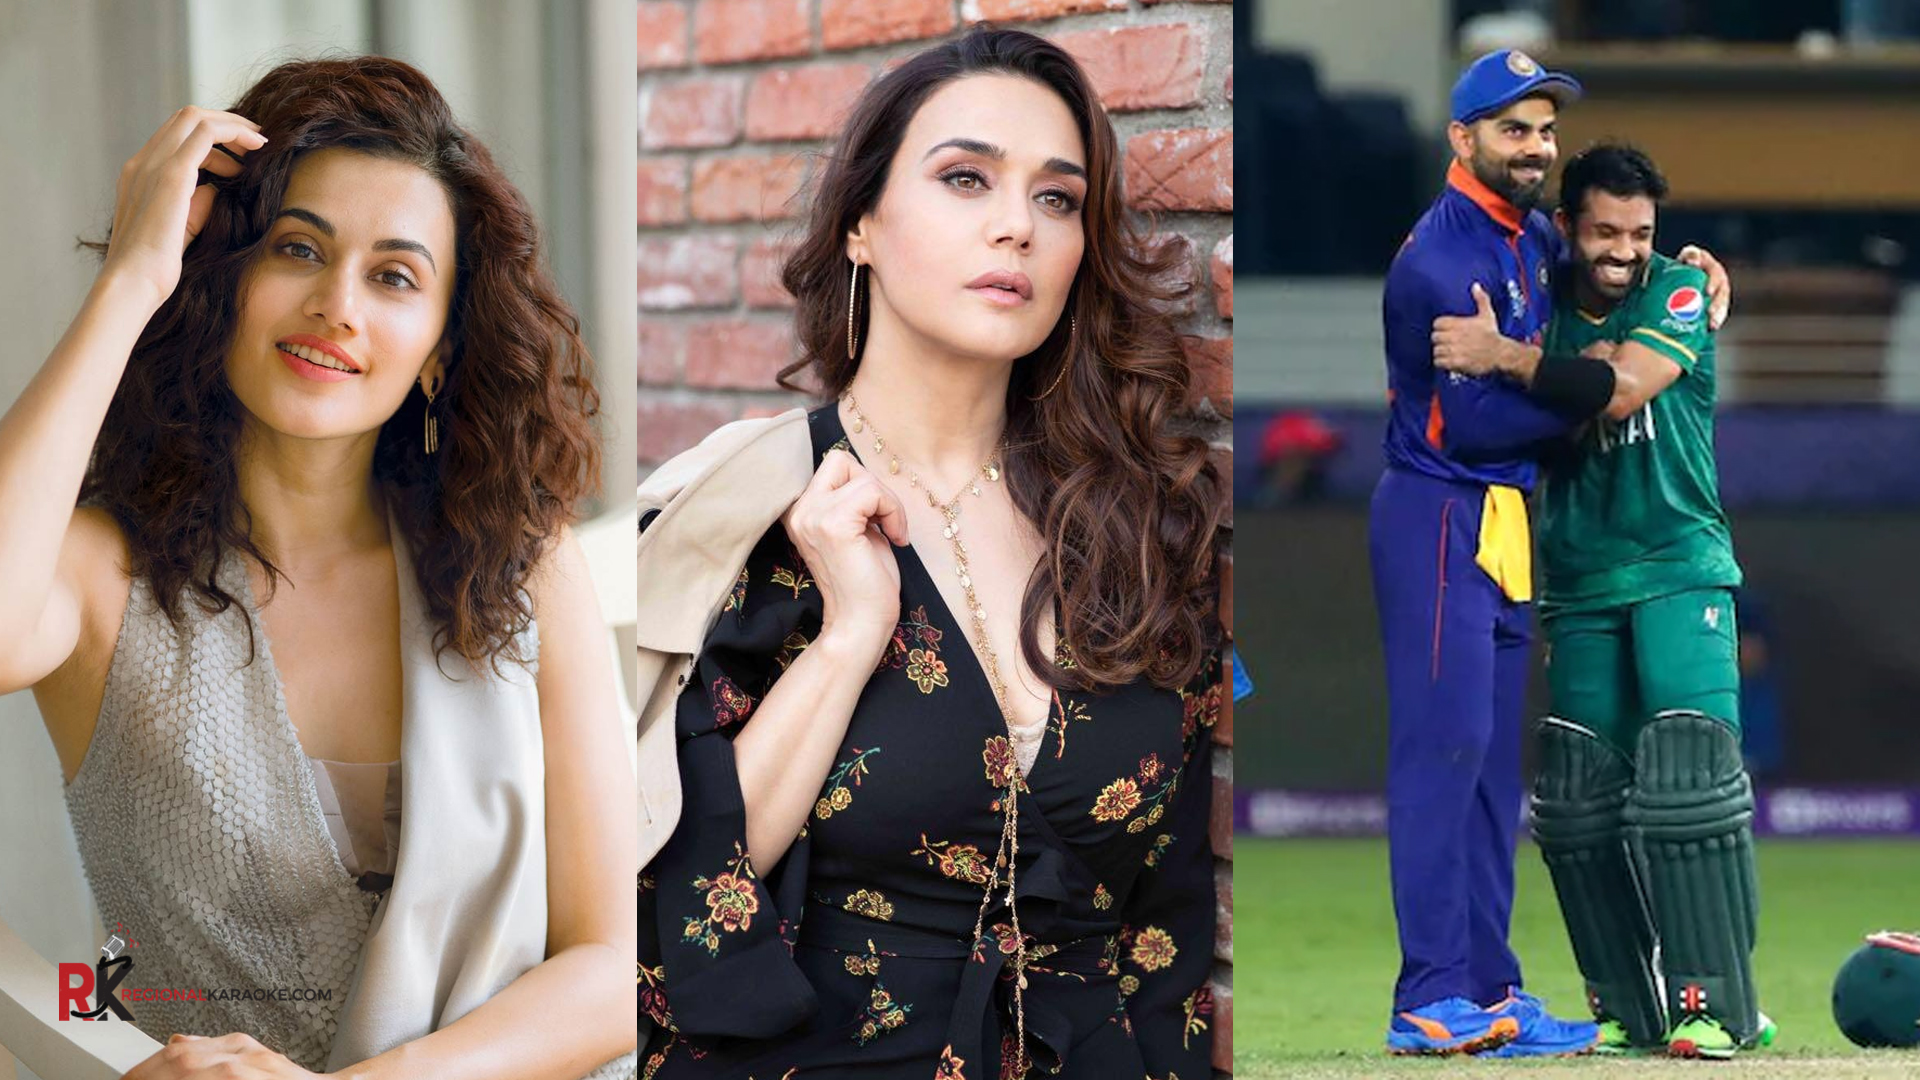 India’s loss to Pakistan in T20 World Cup catches the optimism of Bollywood.